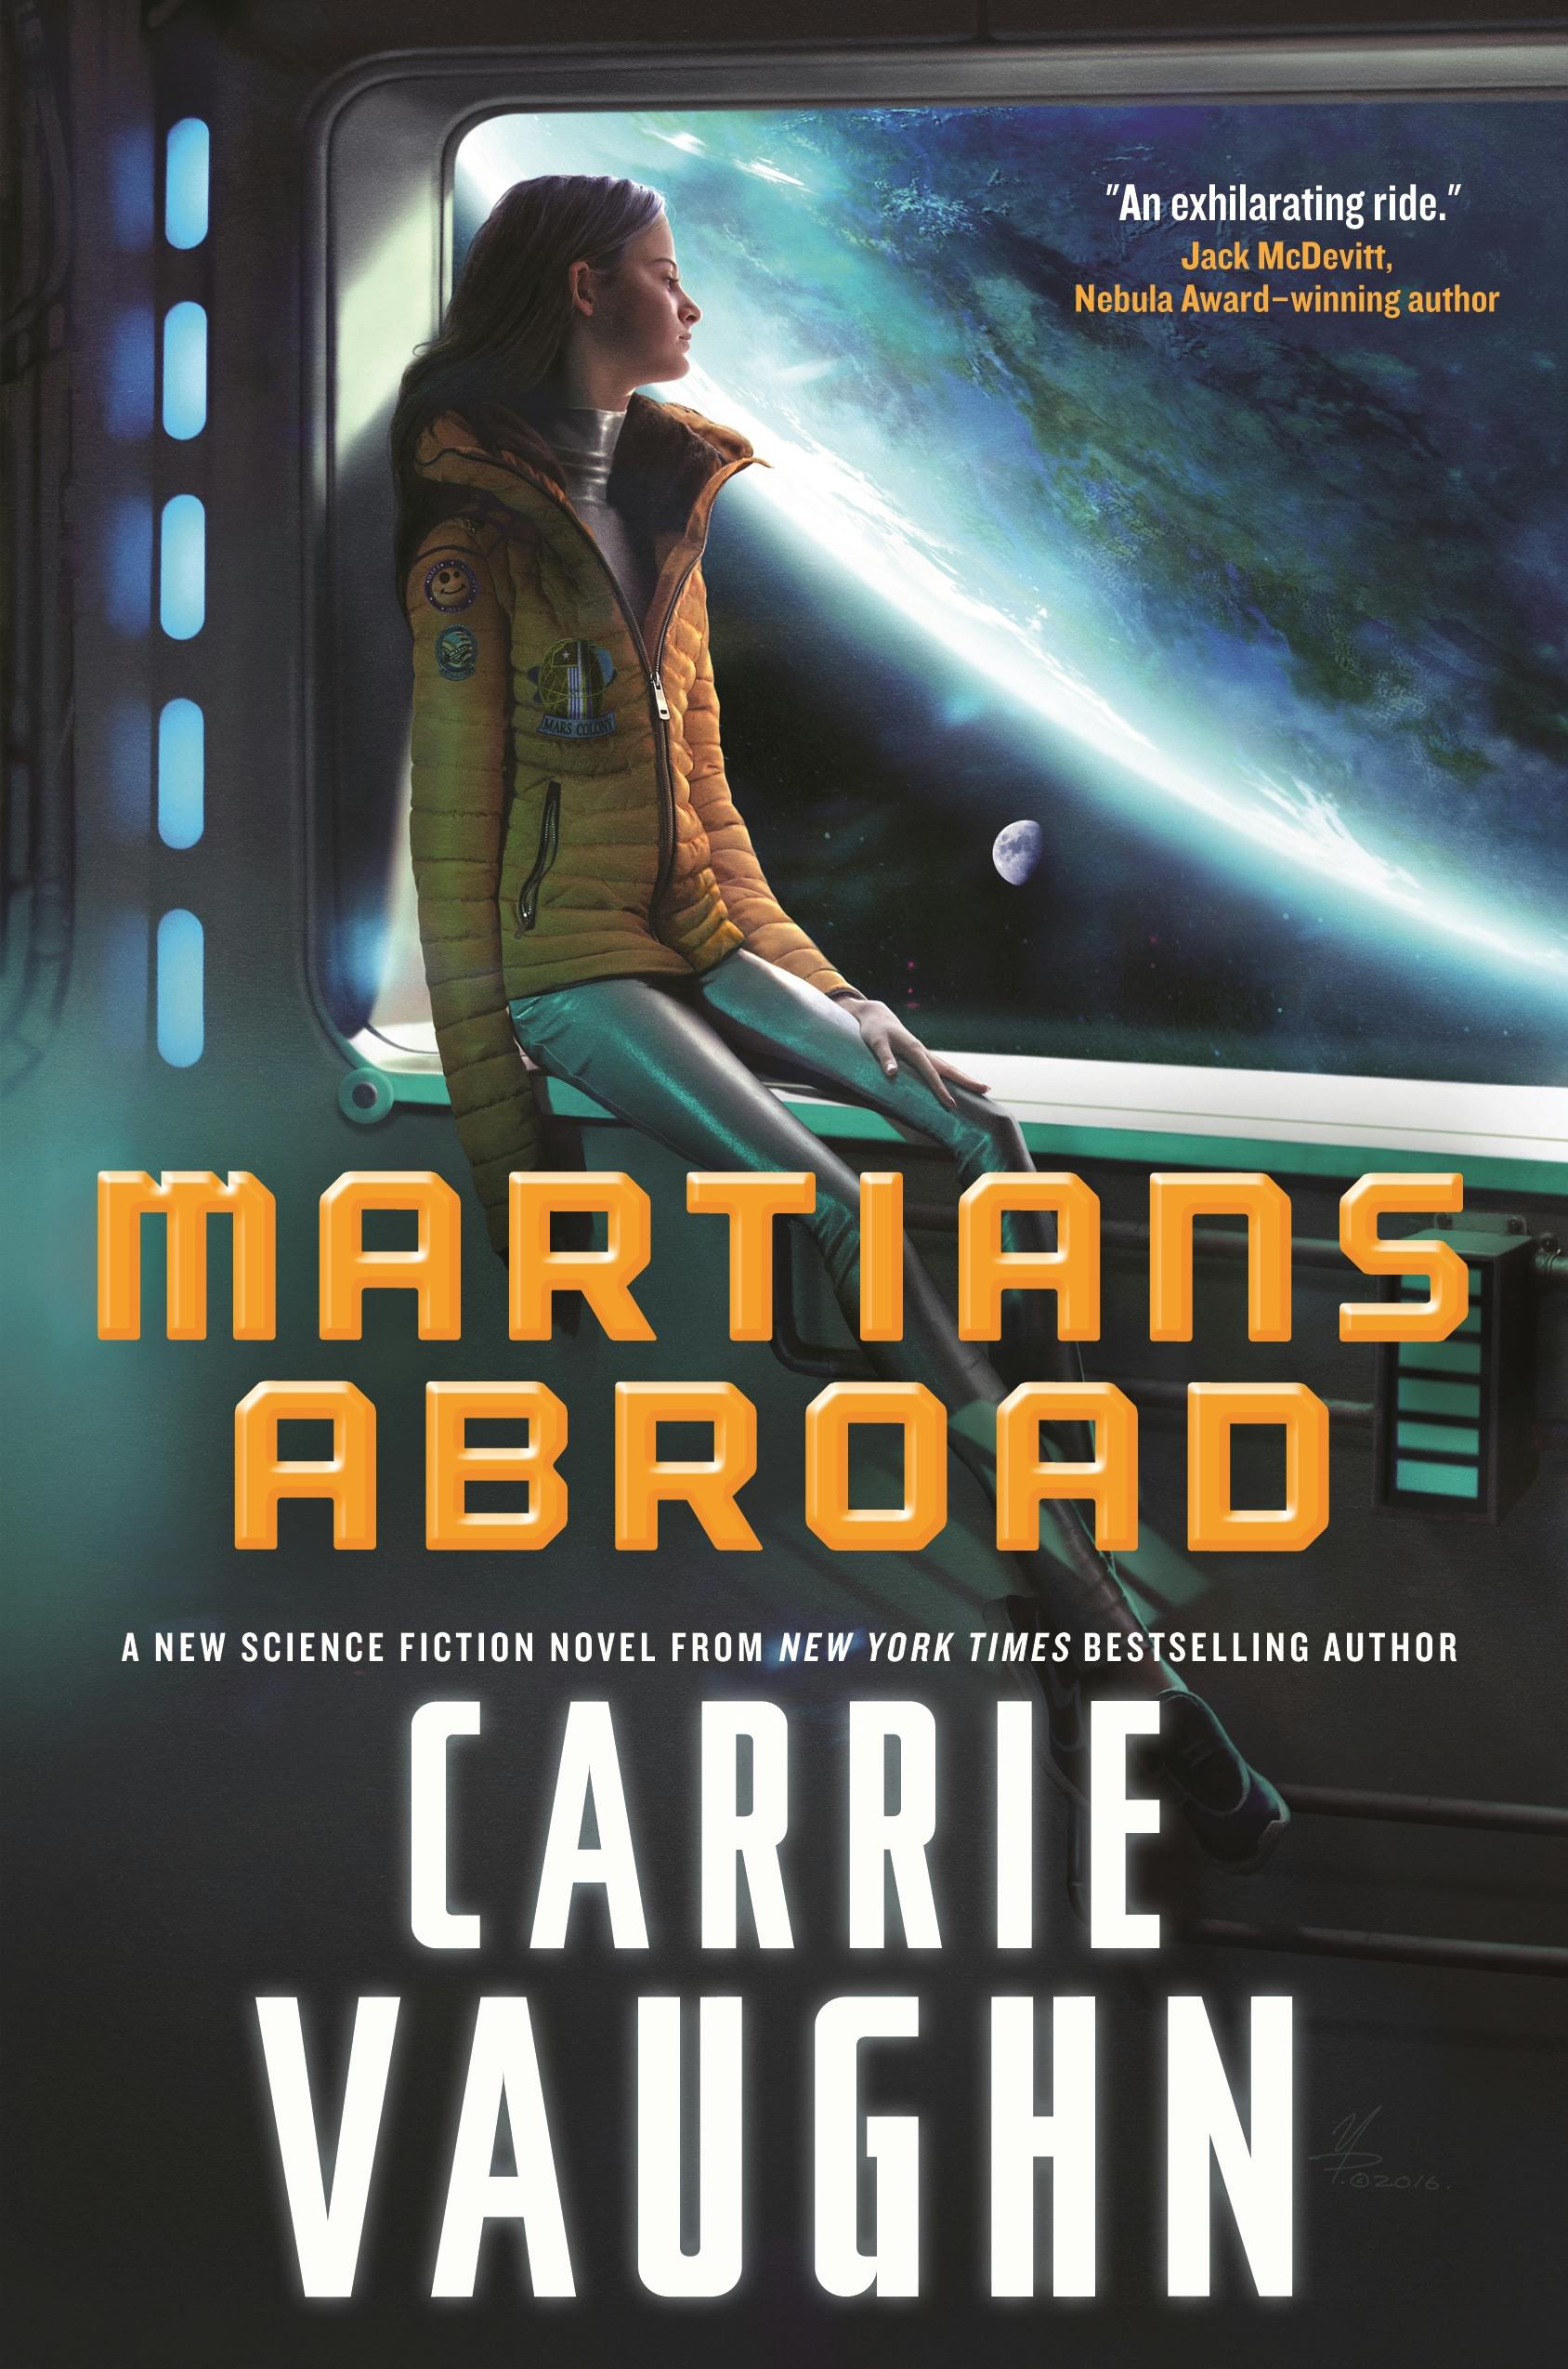 Cover for the book titled as: Martians Abroad